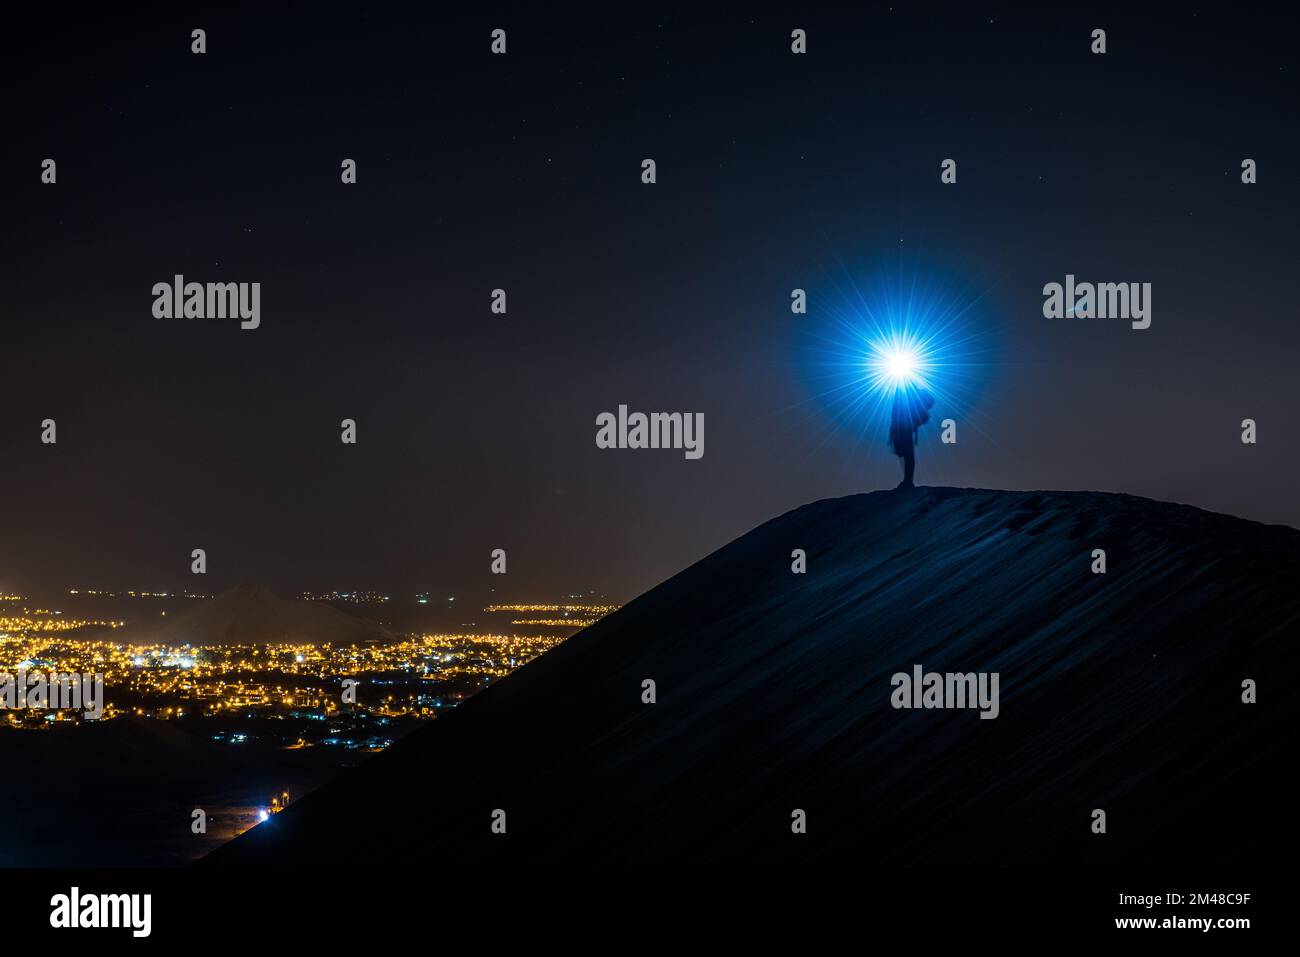 Silhouette of man standing on sand dune  with head torch, Huacachina, Peru, South America Stock Photo